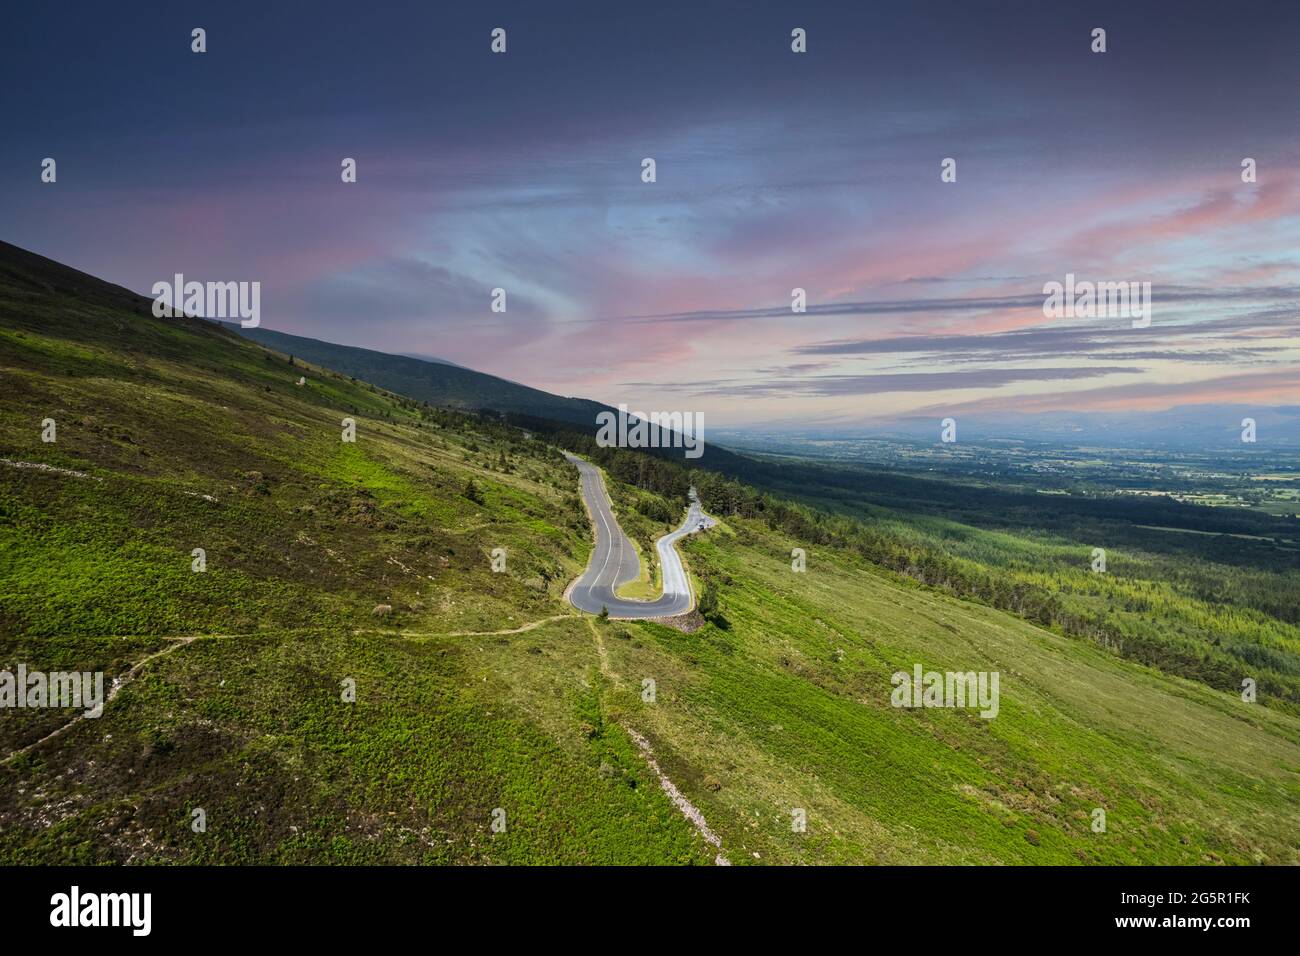 The Vee Pass, a v-shaped turn on the road leading to a gap in the Knockmealdown mountains in Clogheen county Tipperary, Ireland Stock Photo